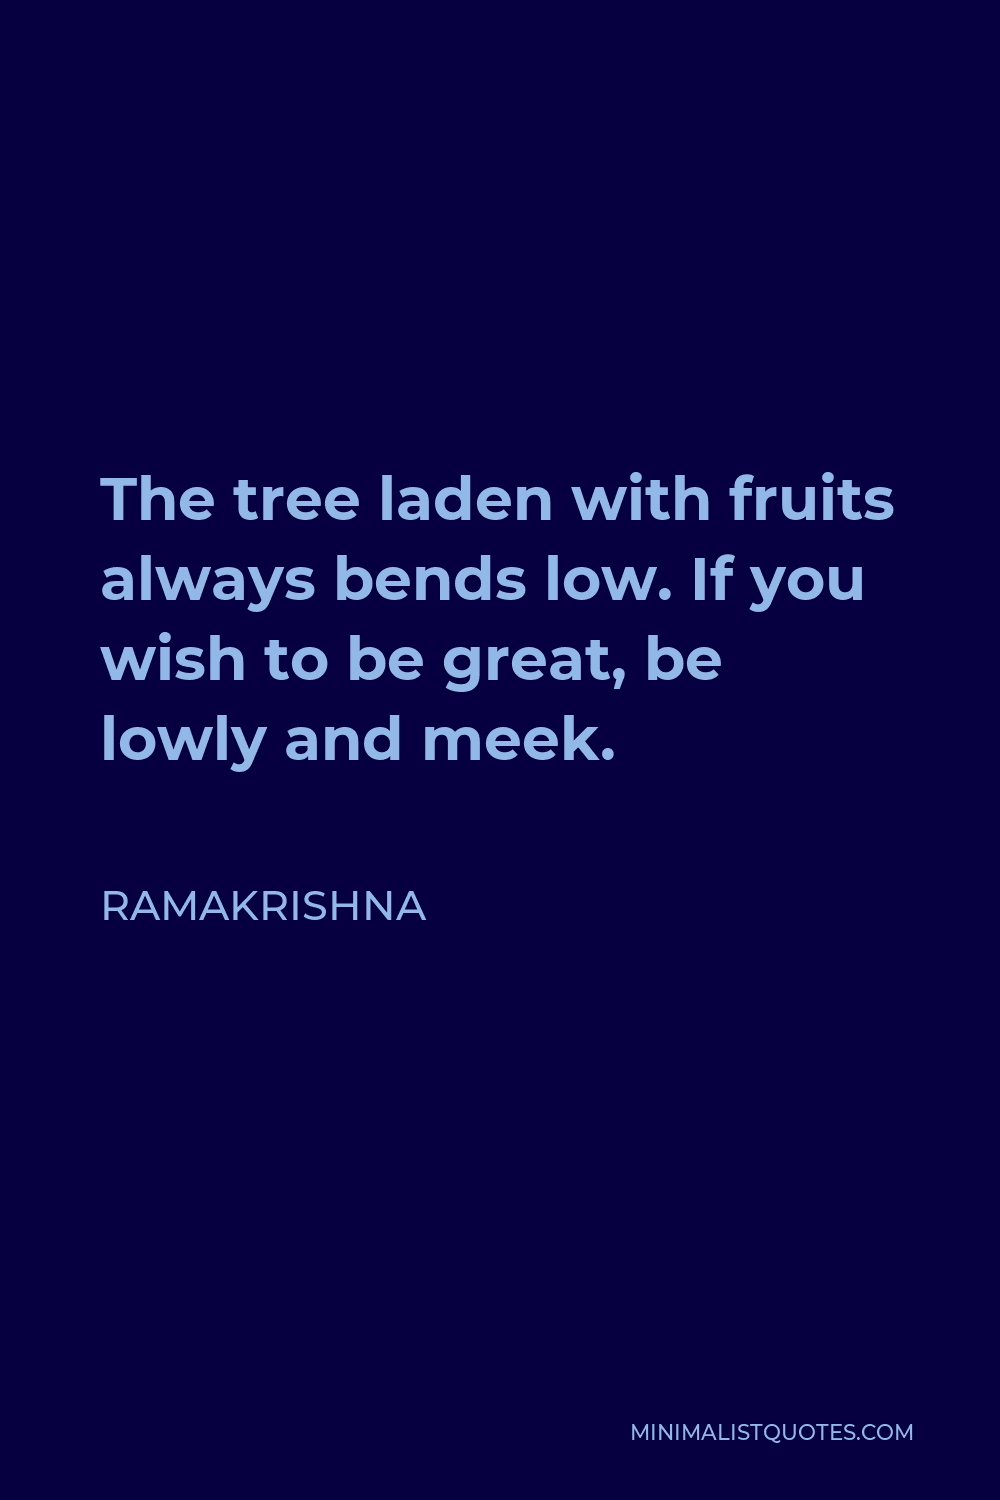 Ramakrishna Quote - The tree laden with fruits always bends low. If you wish to be great, be lowly and meek.